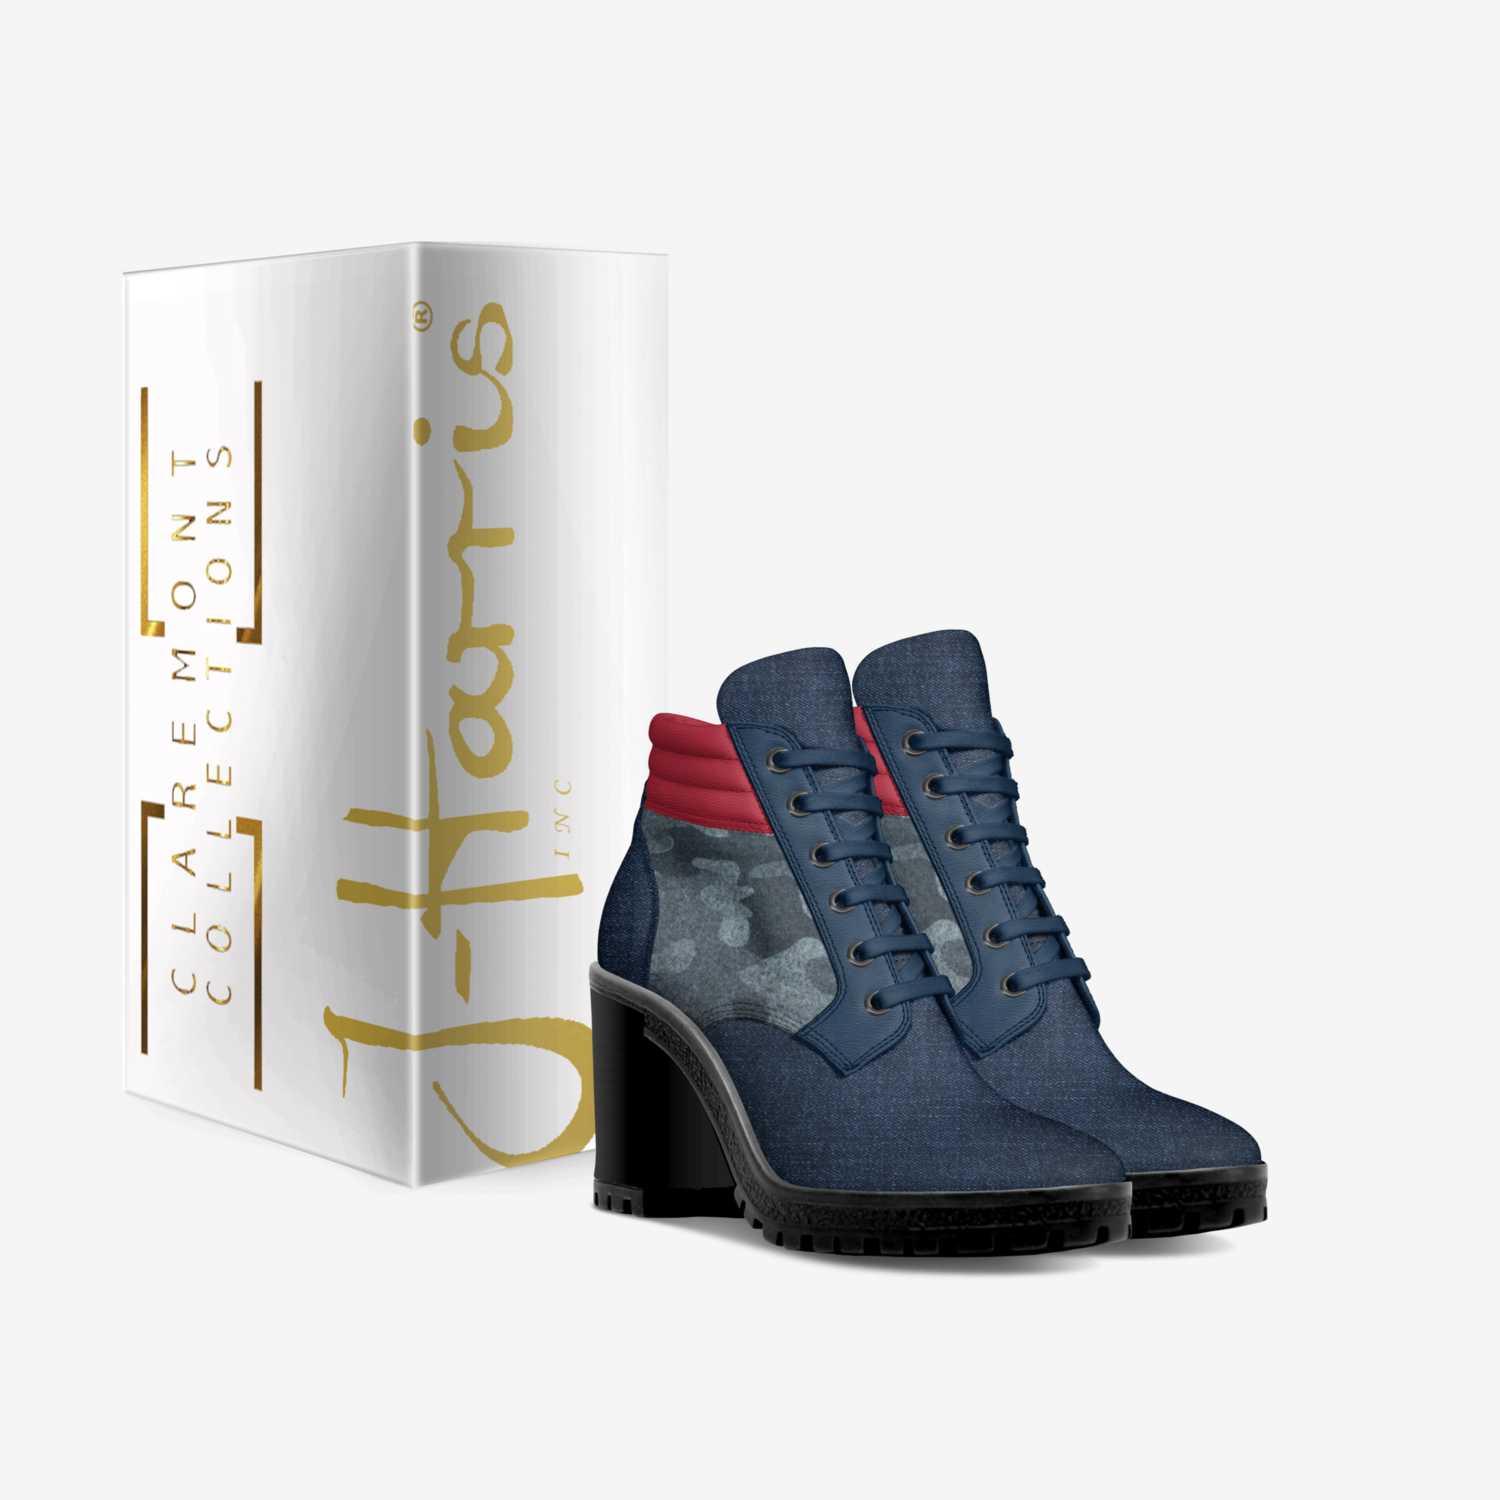 JHarris Designs  custom made in Italy shoes by Haze Claremont | Box view